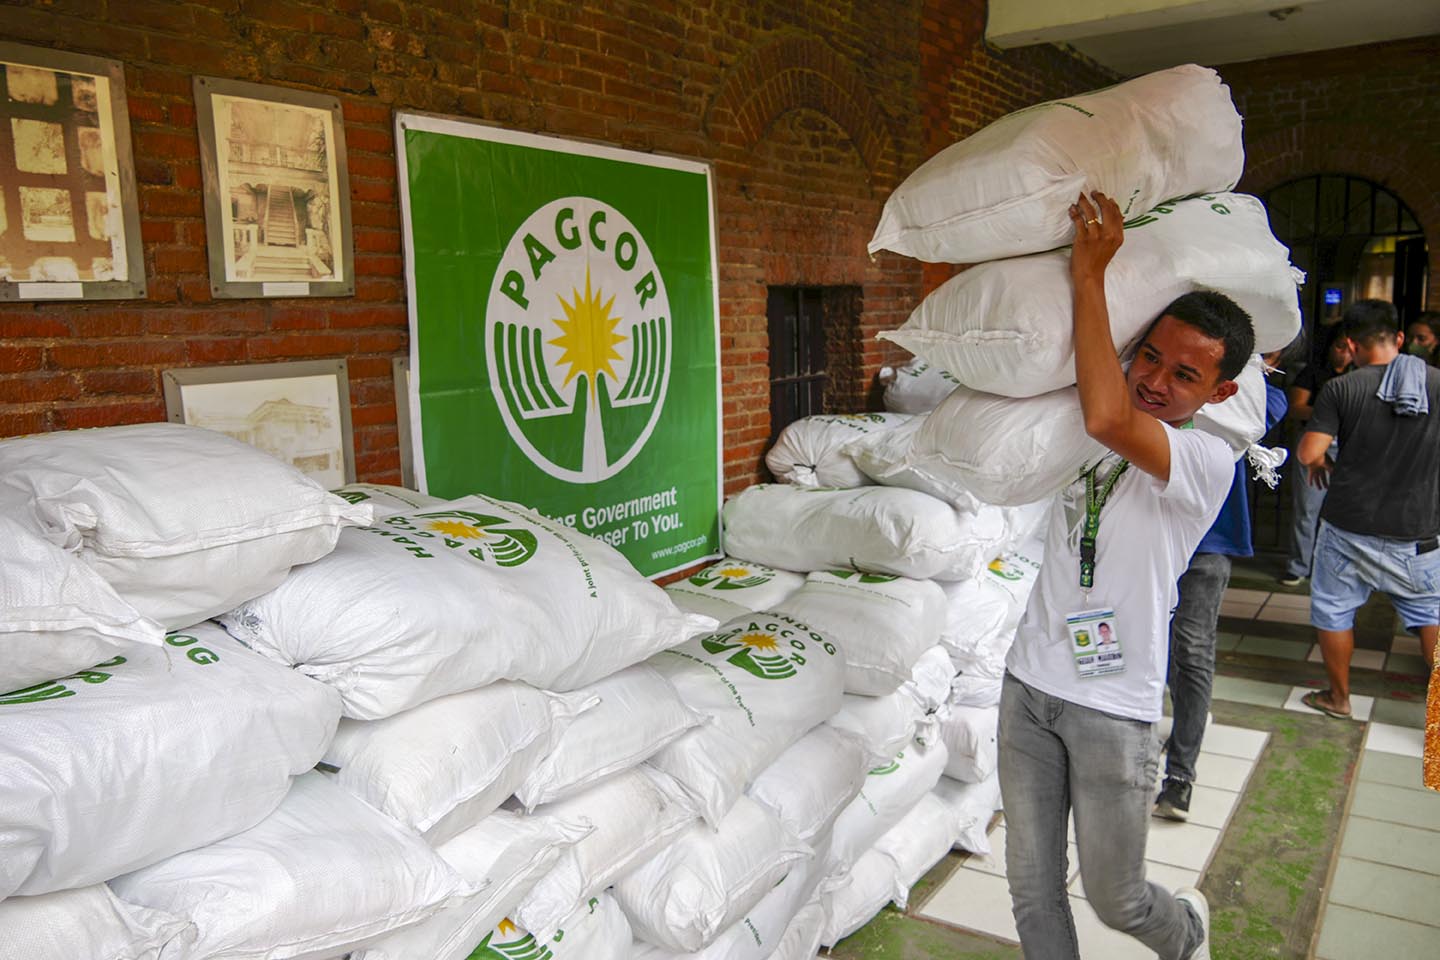 PAGCOR representative distributes relief packs to areas hit by Super Typhoon.